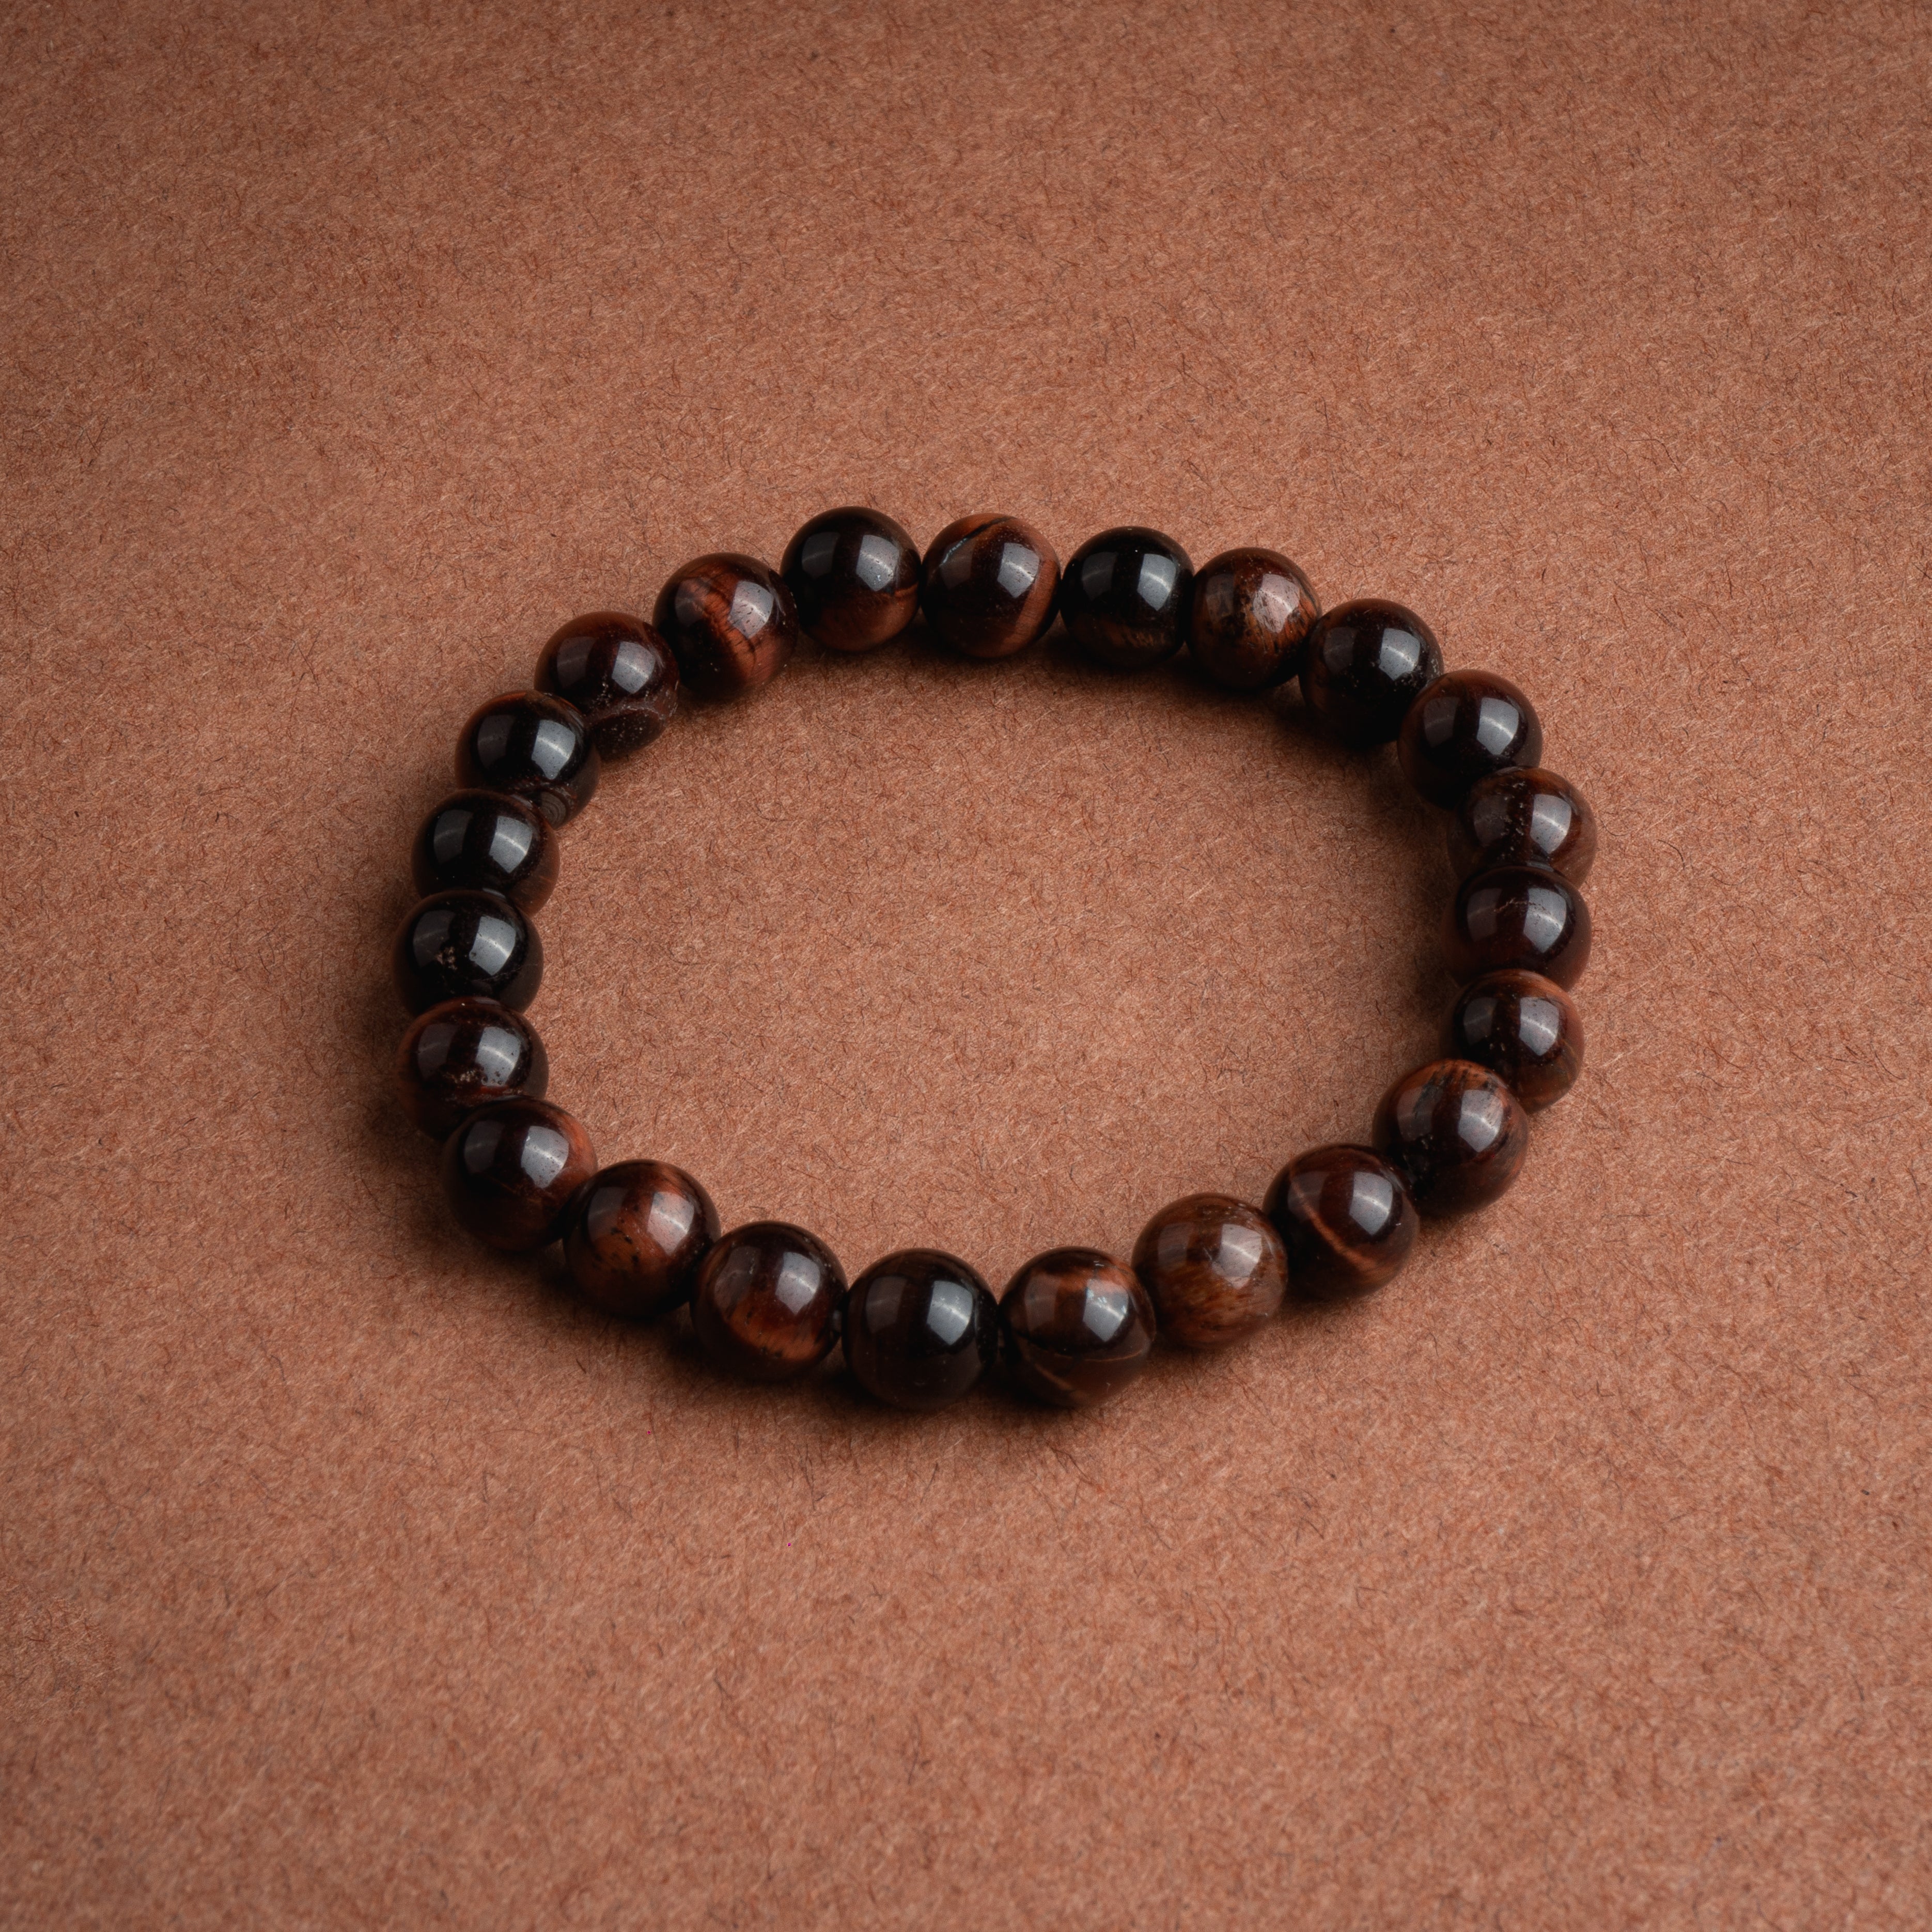 Red Tiger eye Bracelet - To enhance psychic abilities and brings prosperity  - Engineered to Heal²